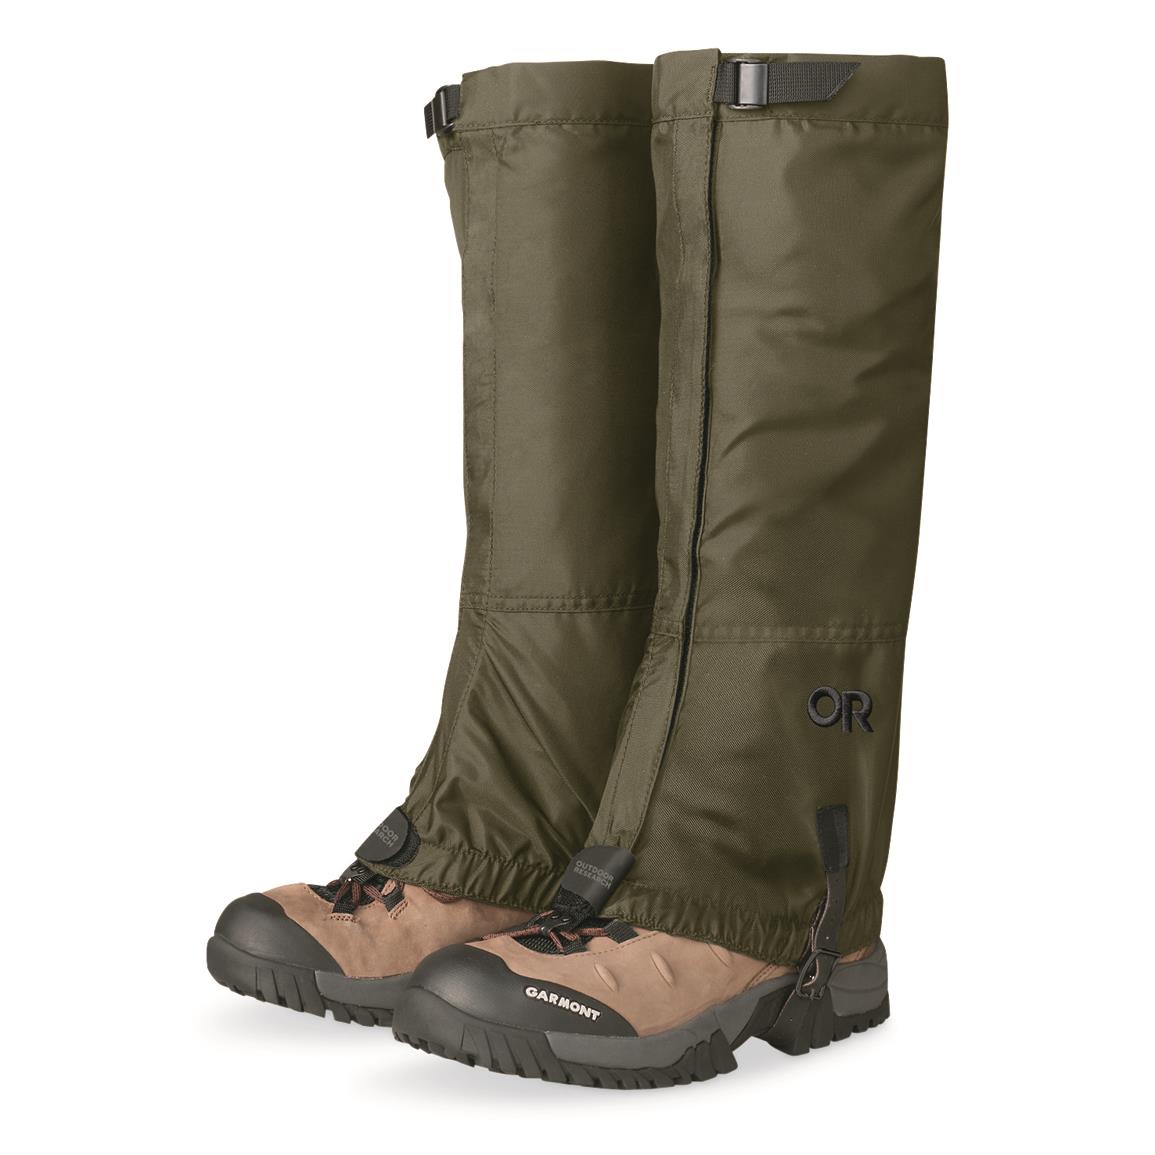 Outdoor Research Bugout Rocky Mountain High Gaiters, Fatigue